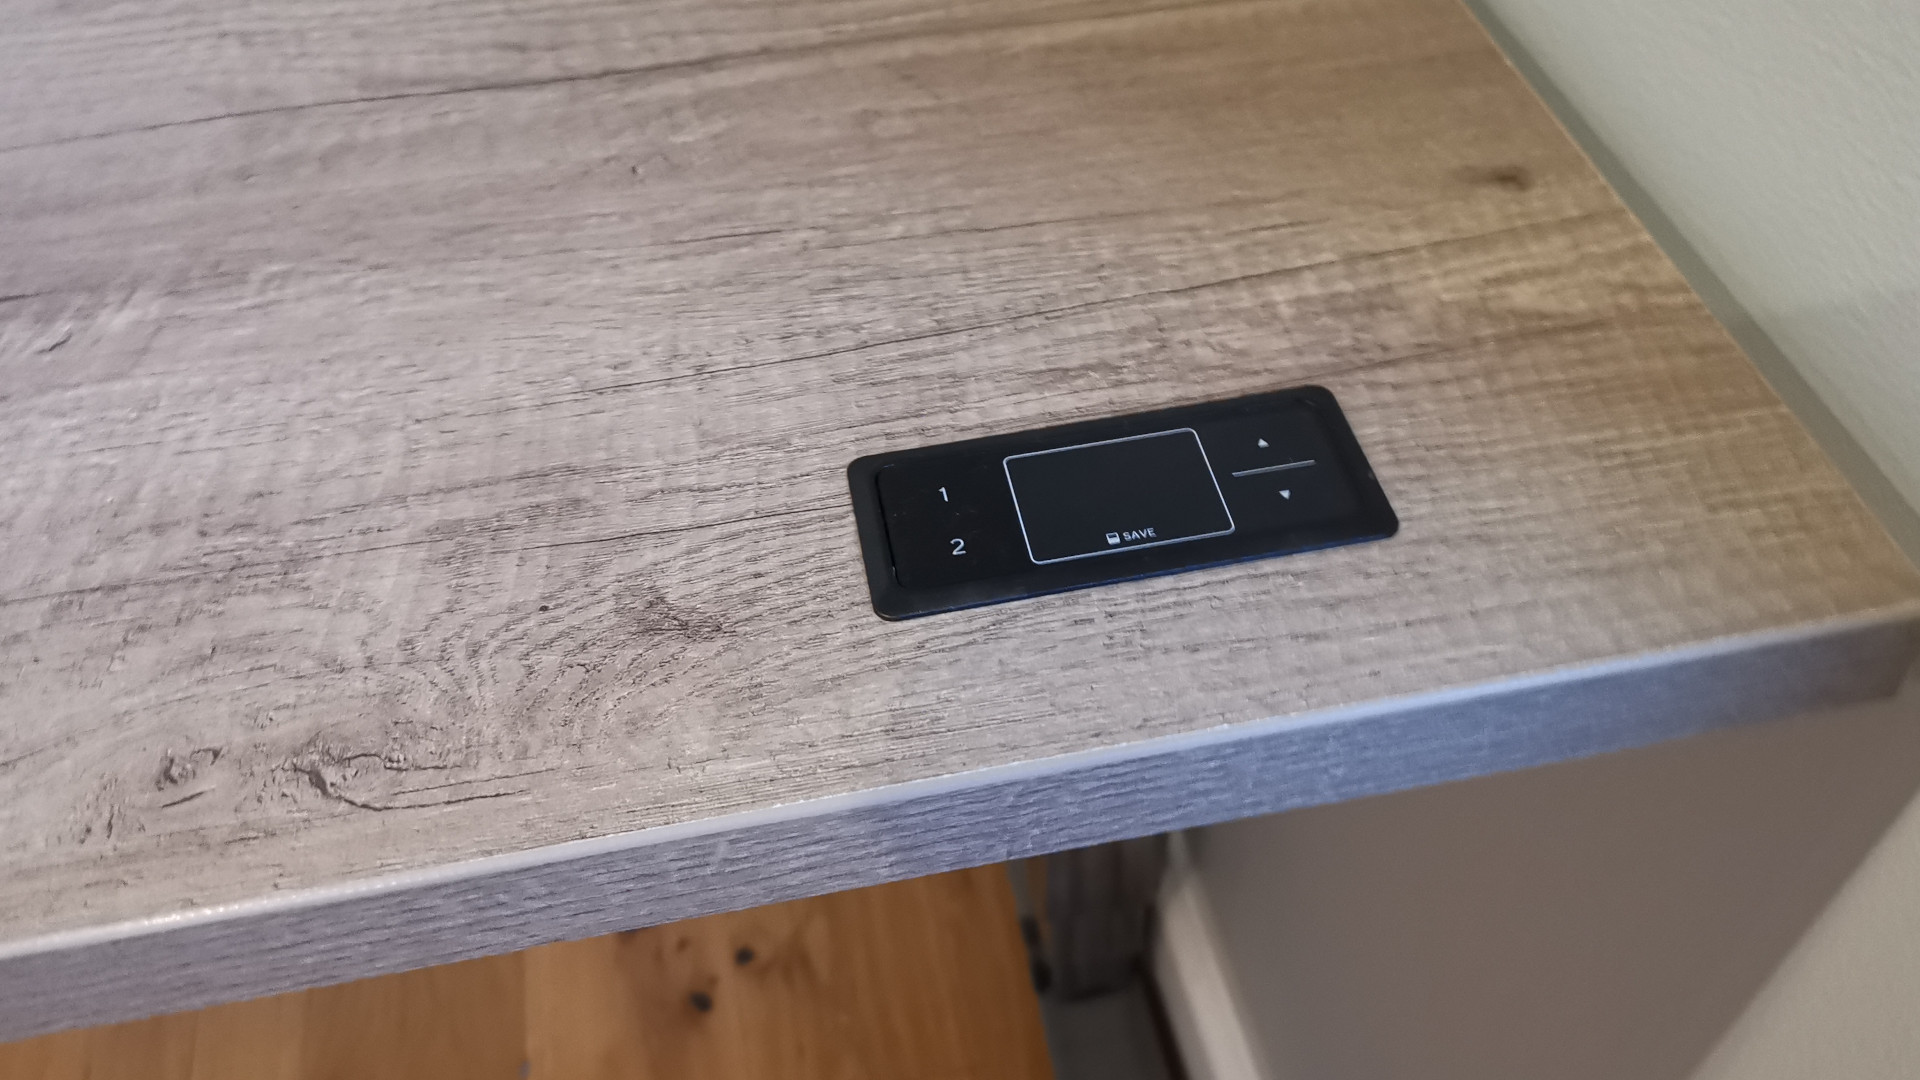 The upgraded memory control switch on the Friska Stockholm standing desk